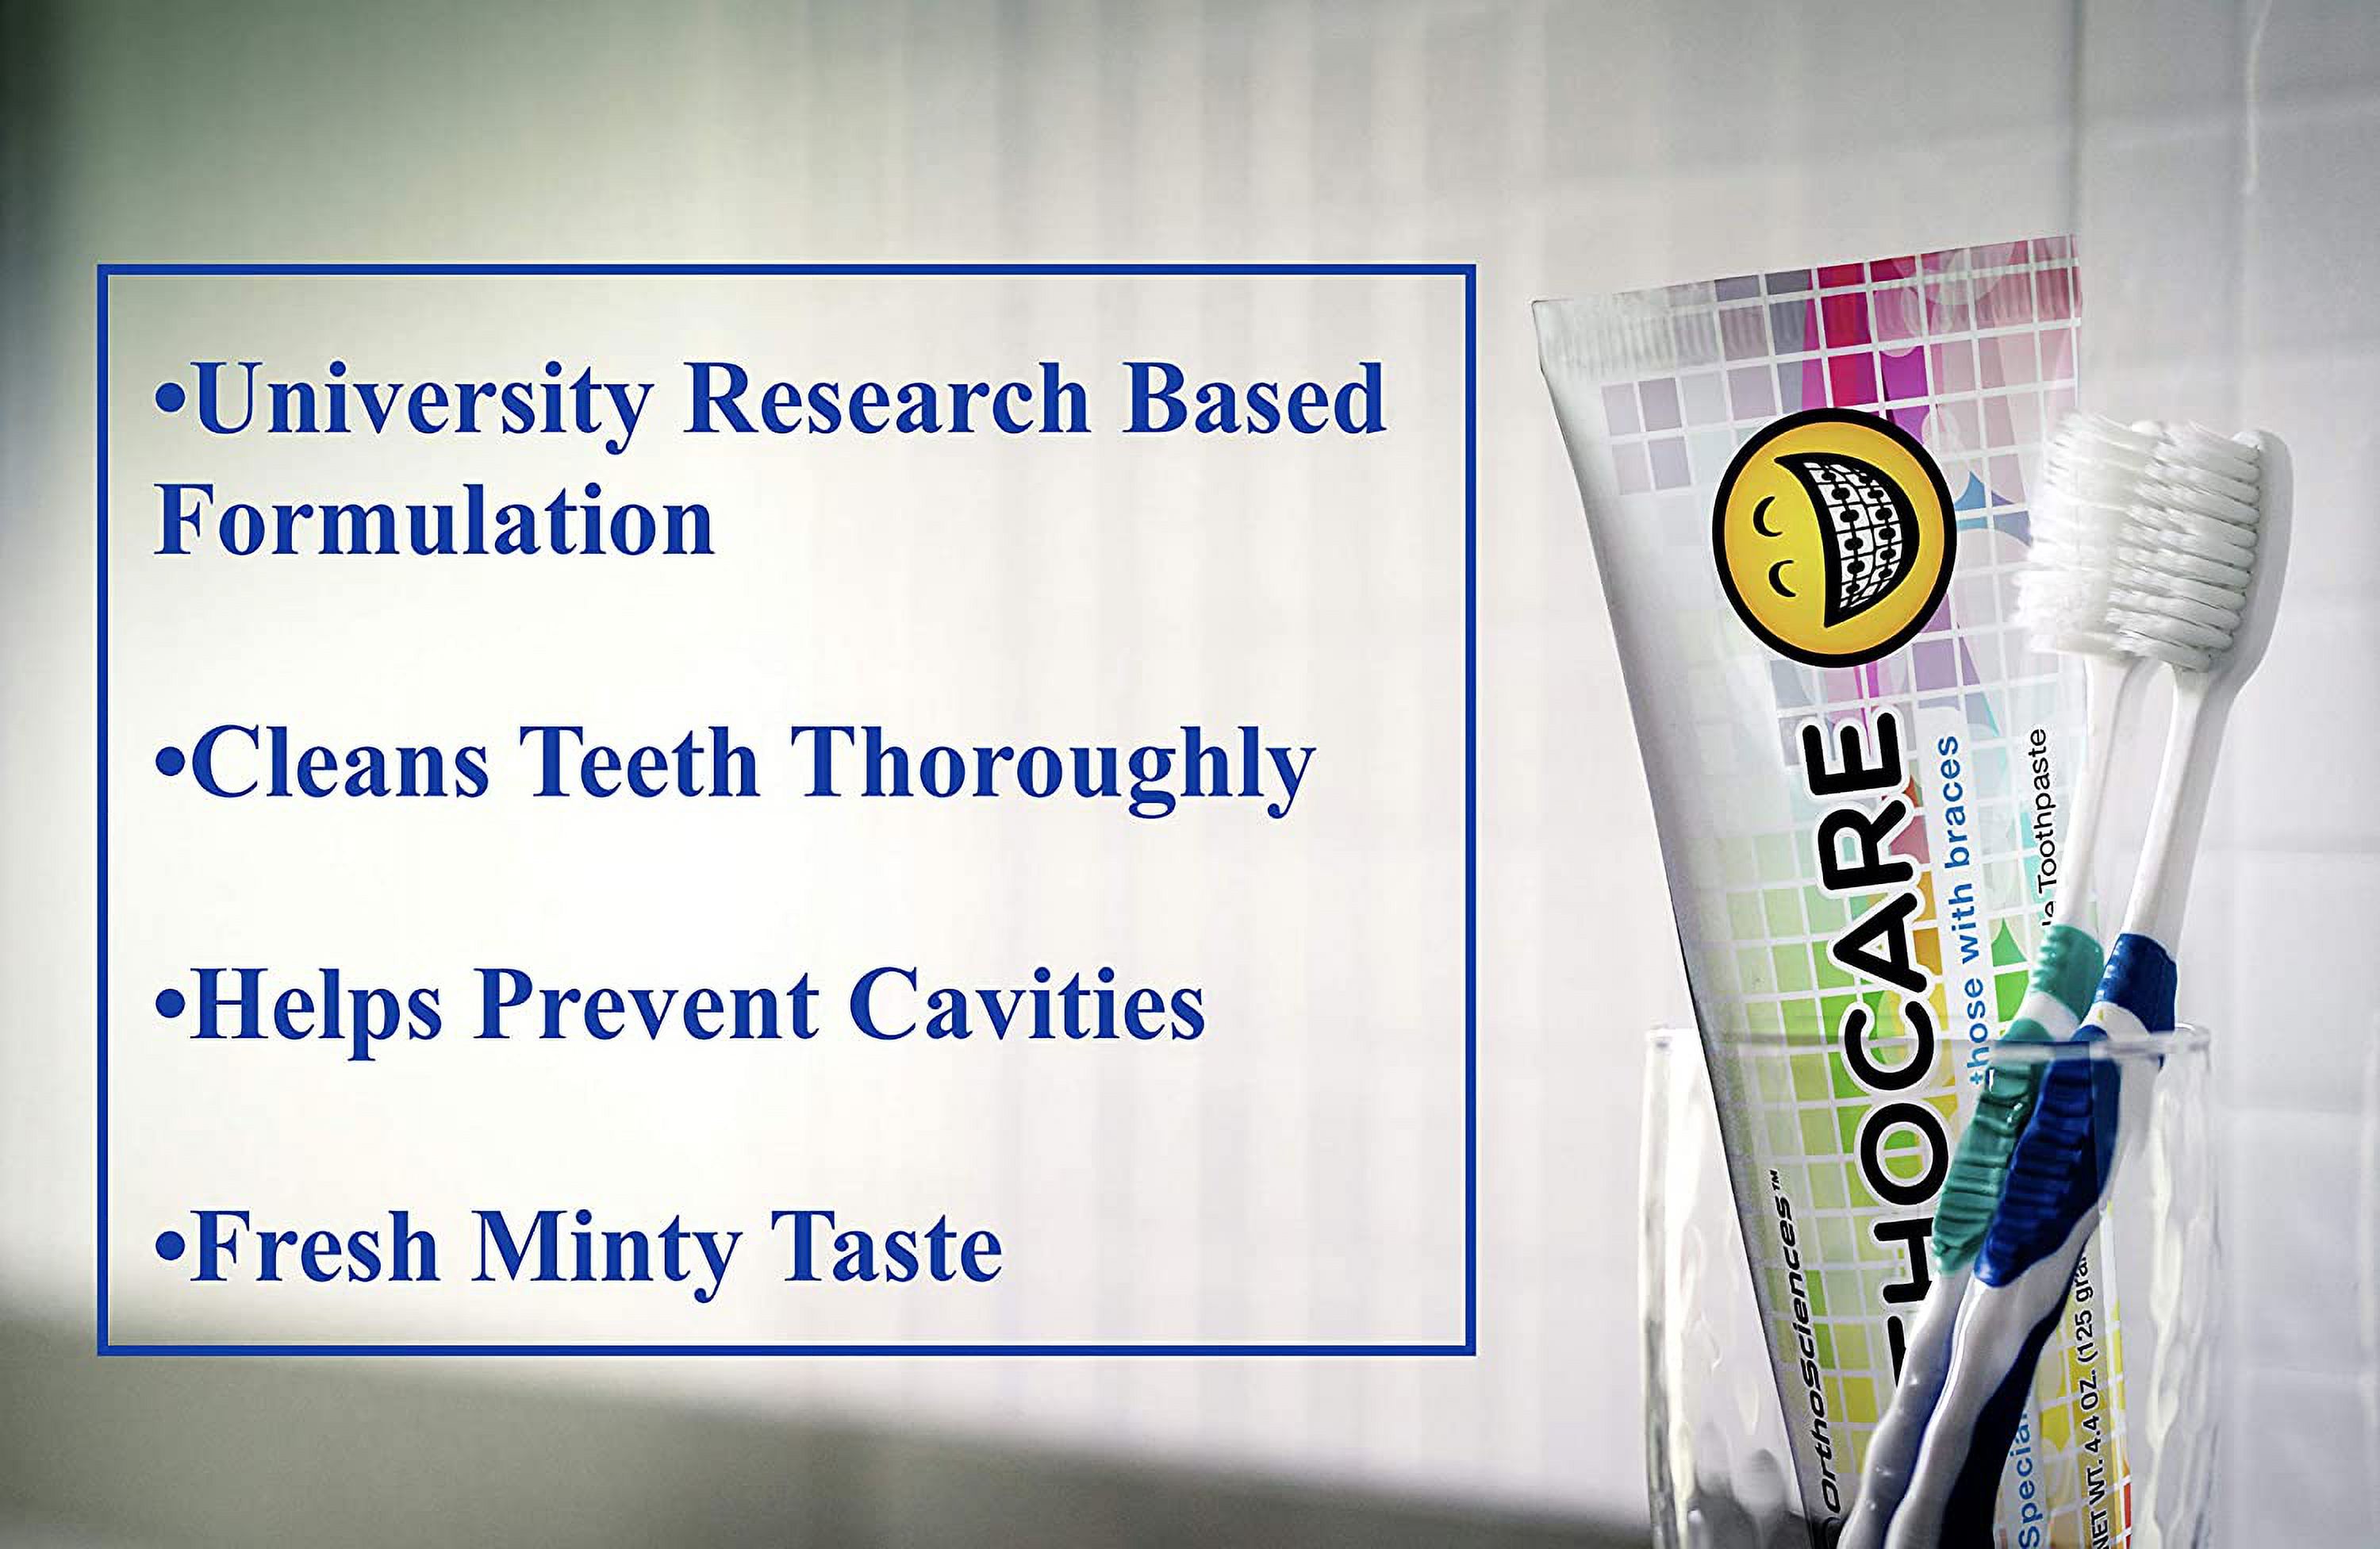 ORTHOCARE Toothpaste - image 5 of 5